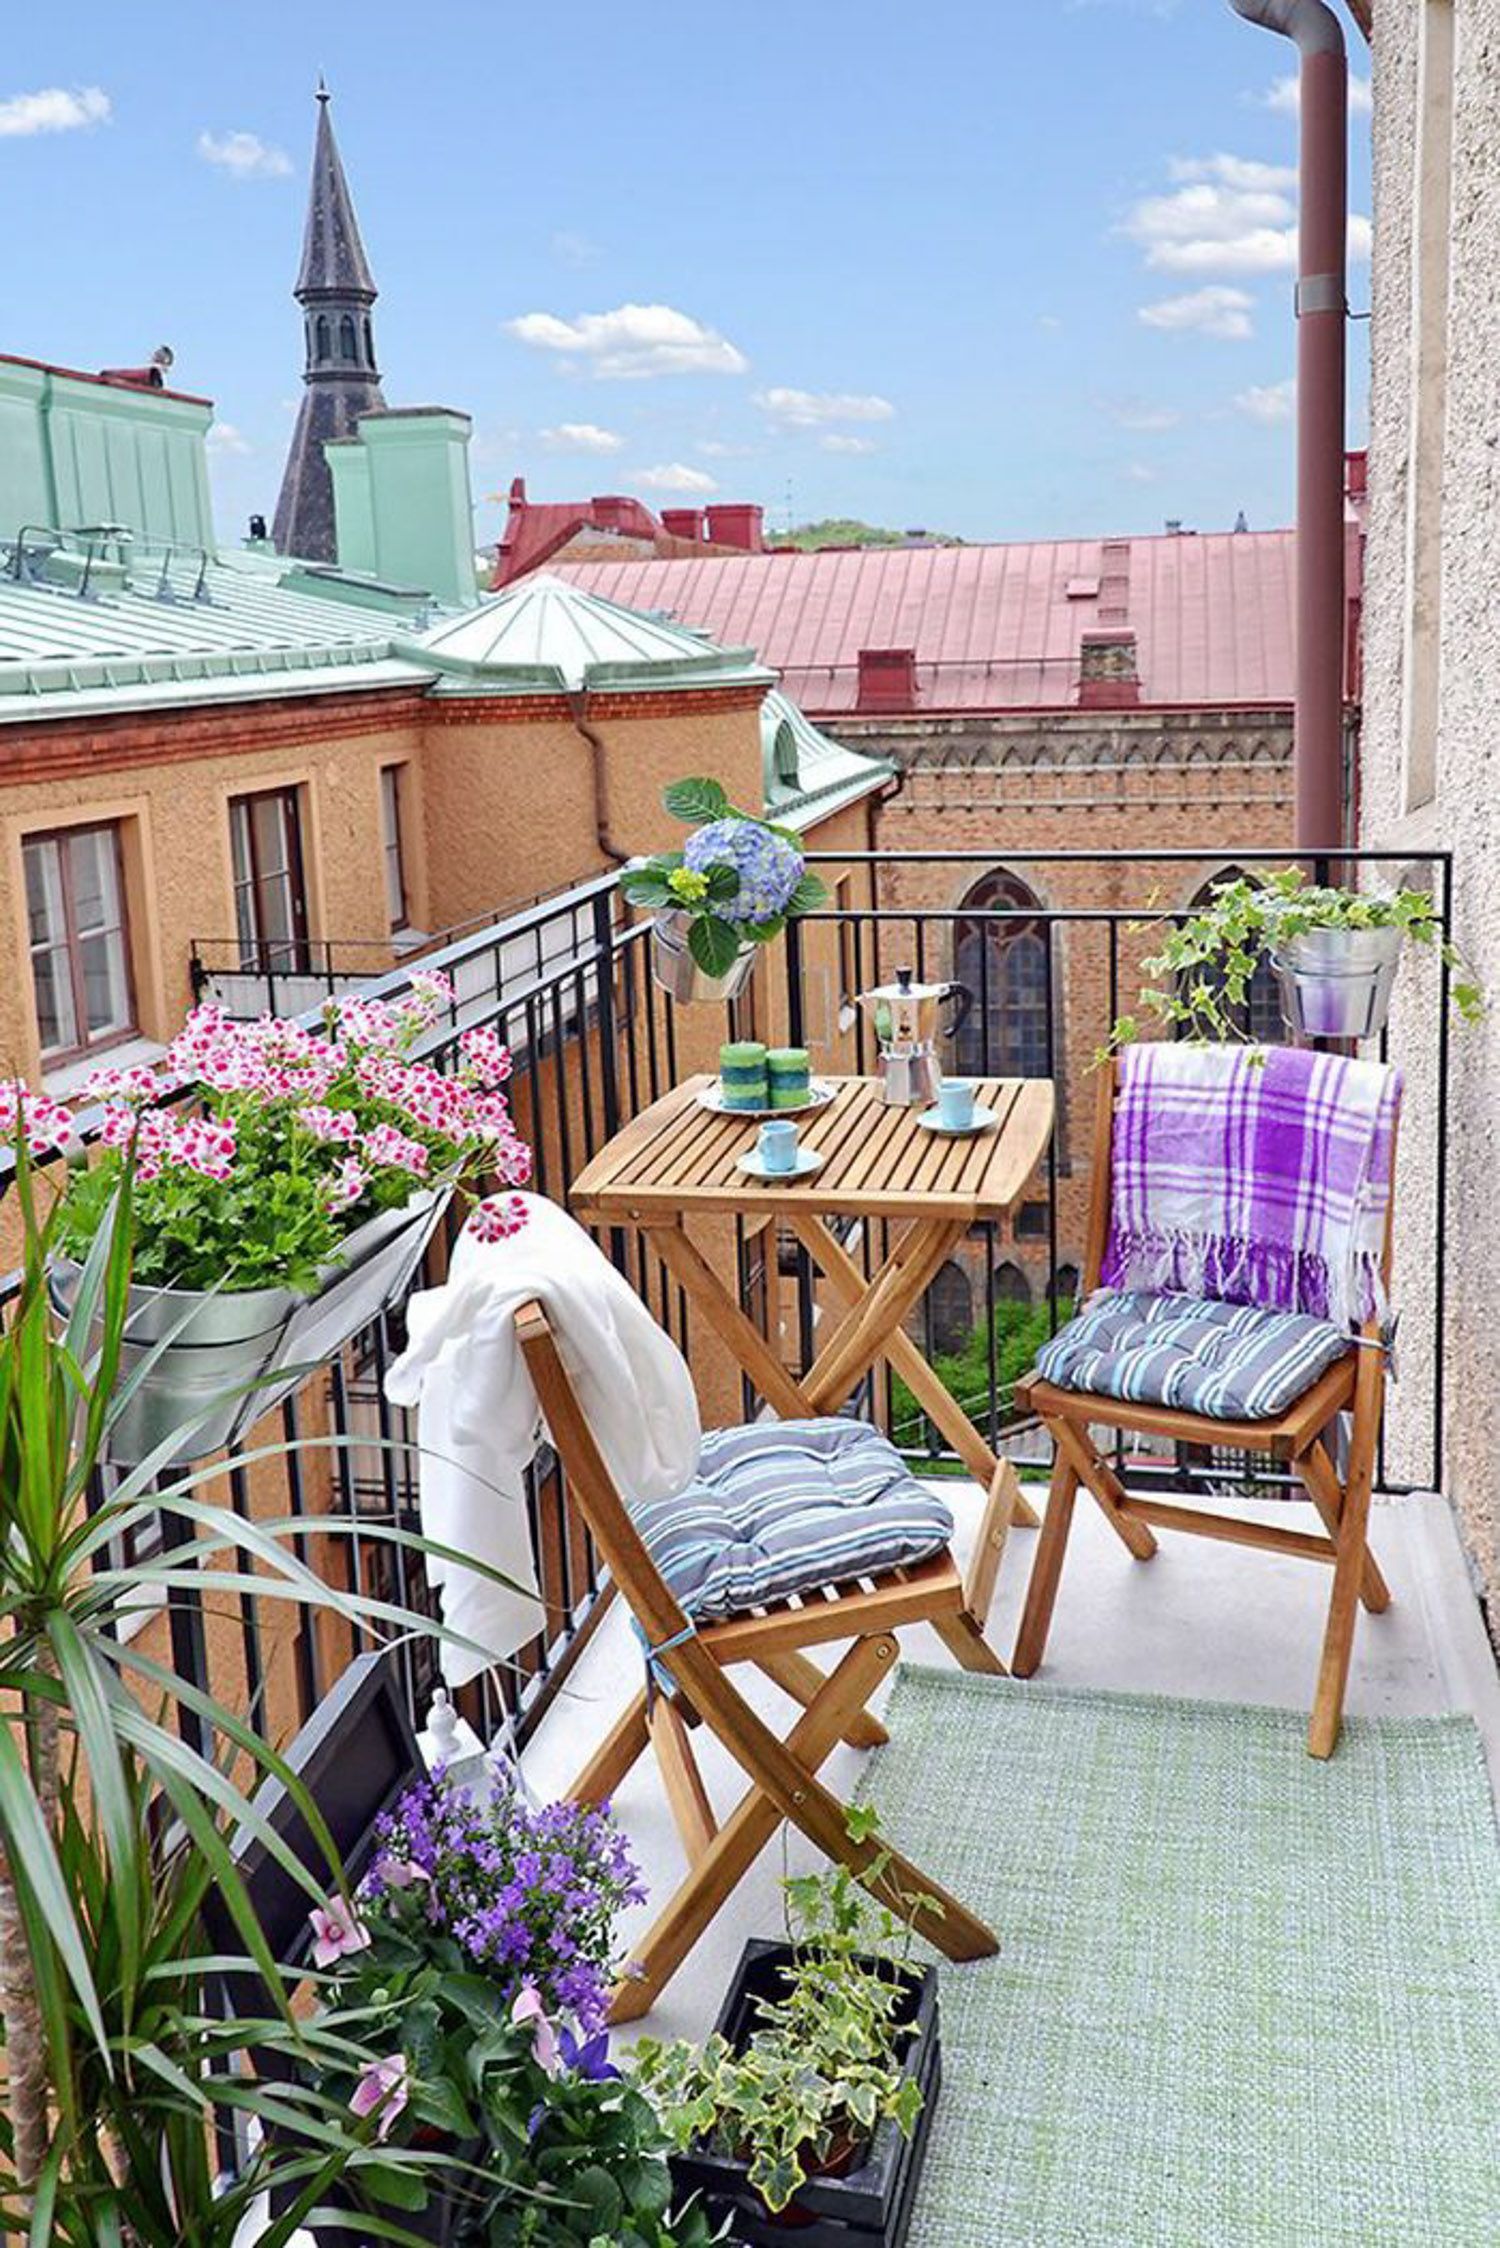 Inspiration for Small Apartment Balconies in the City -   24 simple balcony decor
 ideas